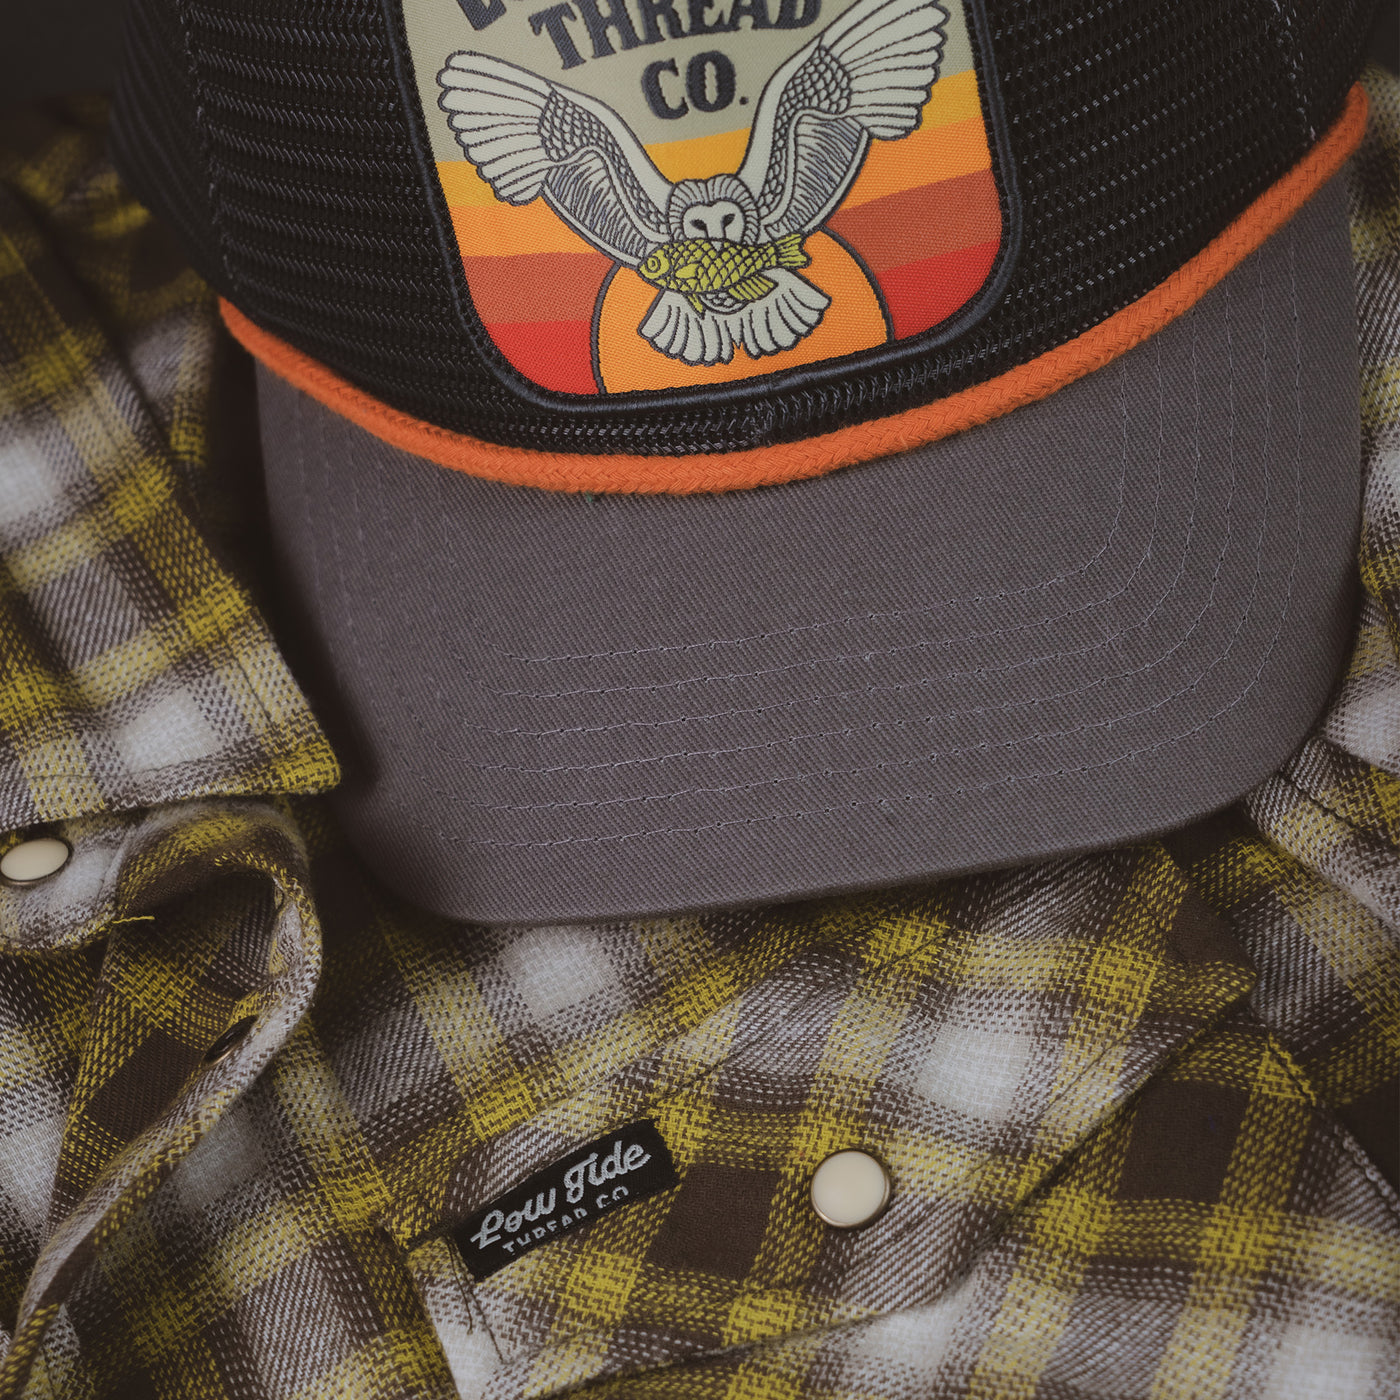 The Outlaw Snap Shirt - Golden Olive